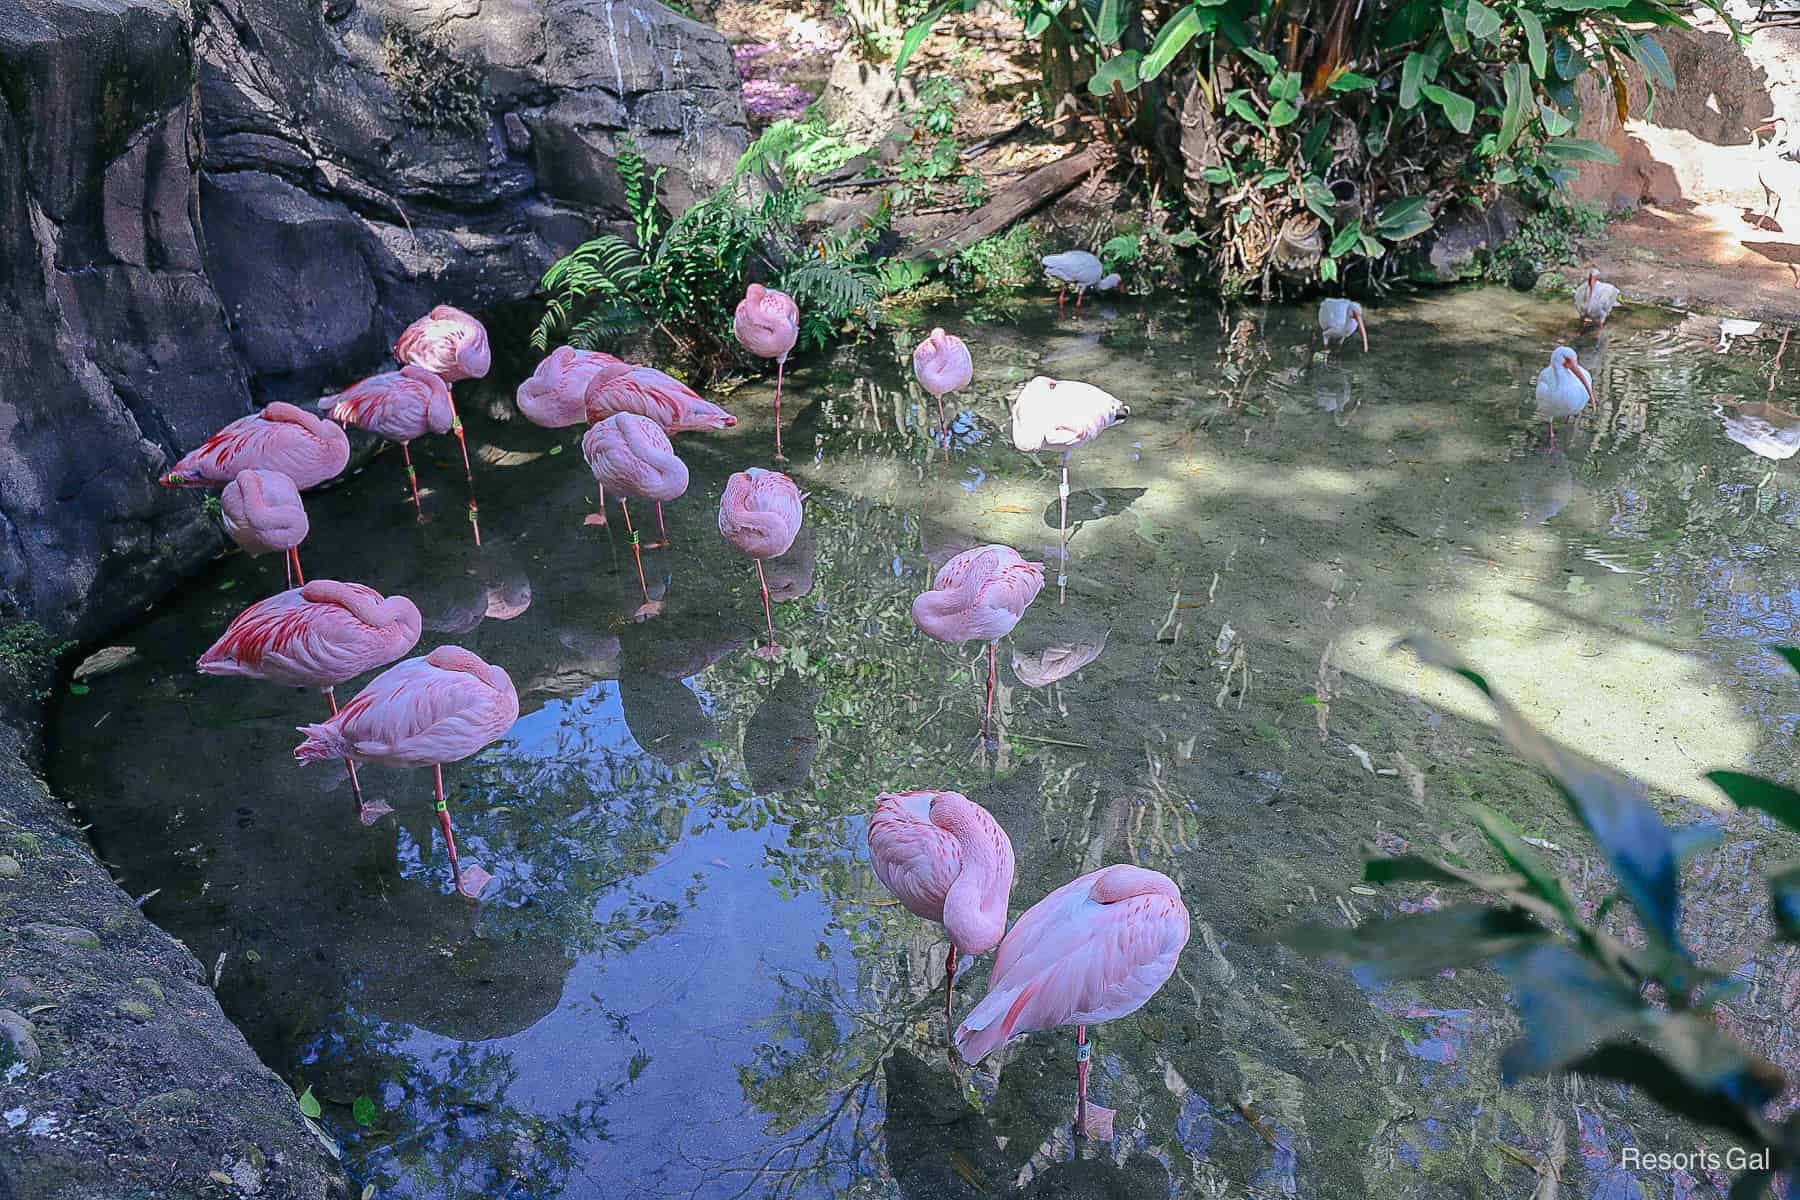 a lesser flamingo exhibit in front of the Tree of Life 